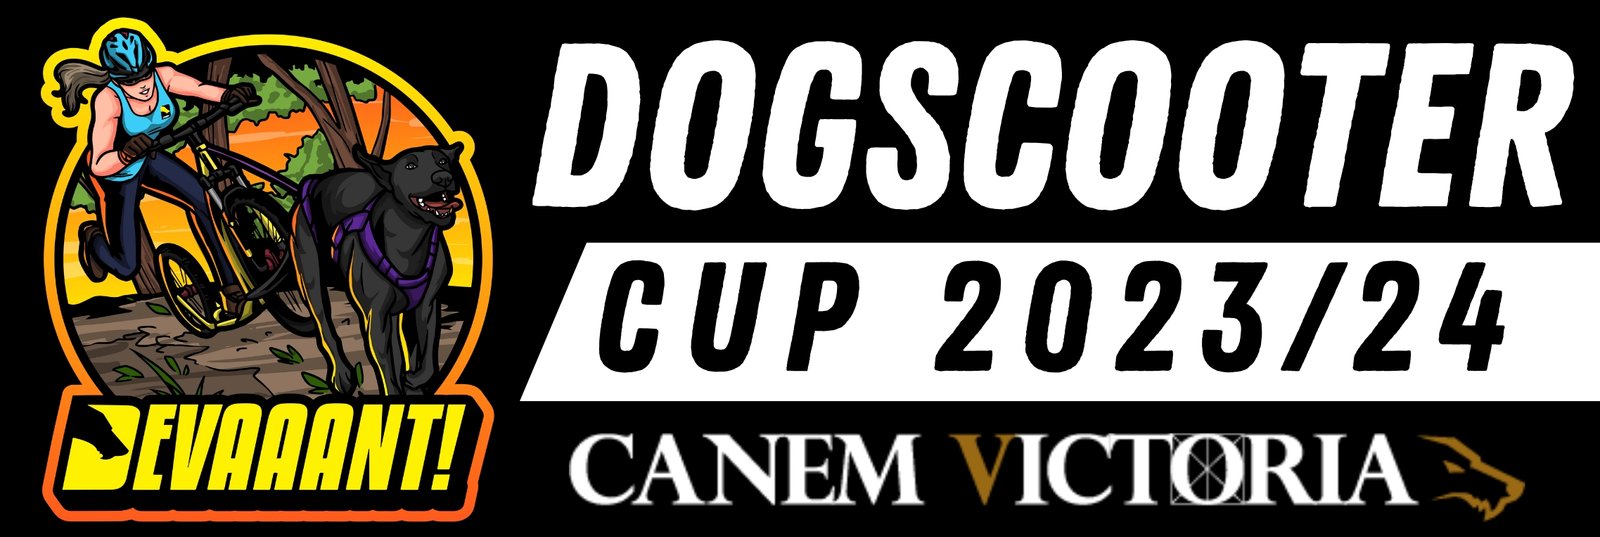 dogscooter-cup-canem-victoria